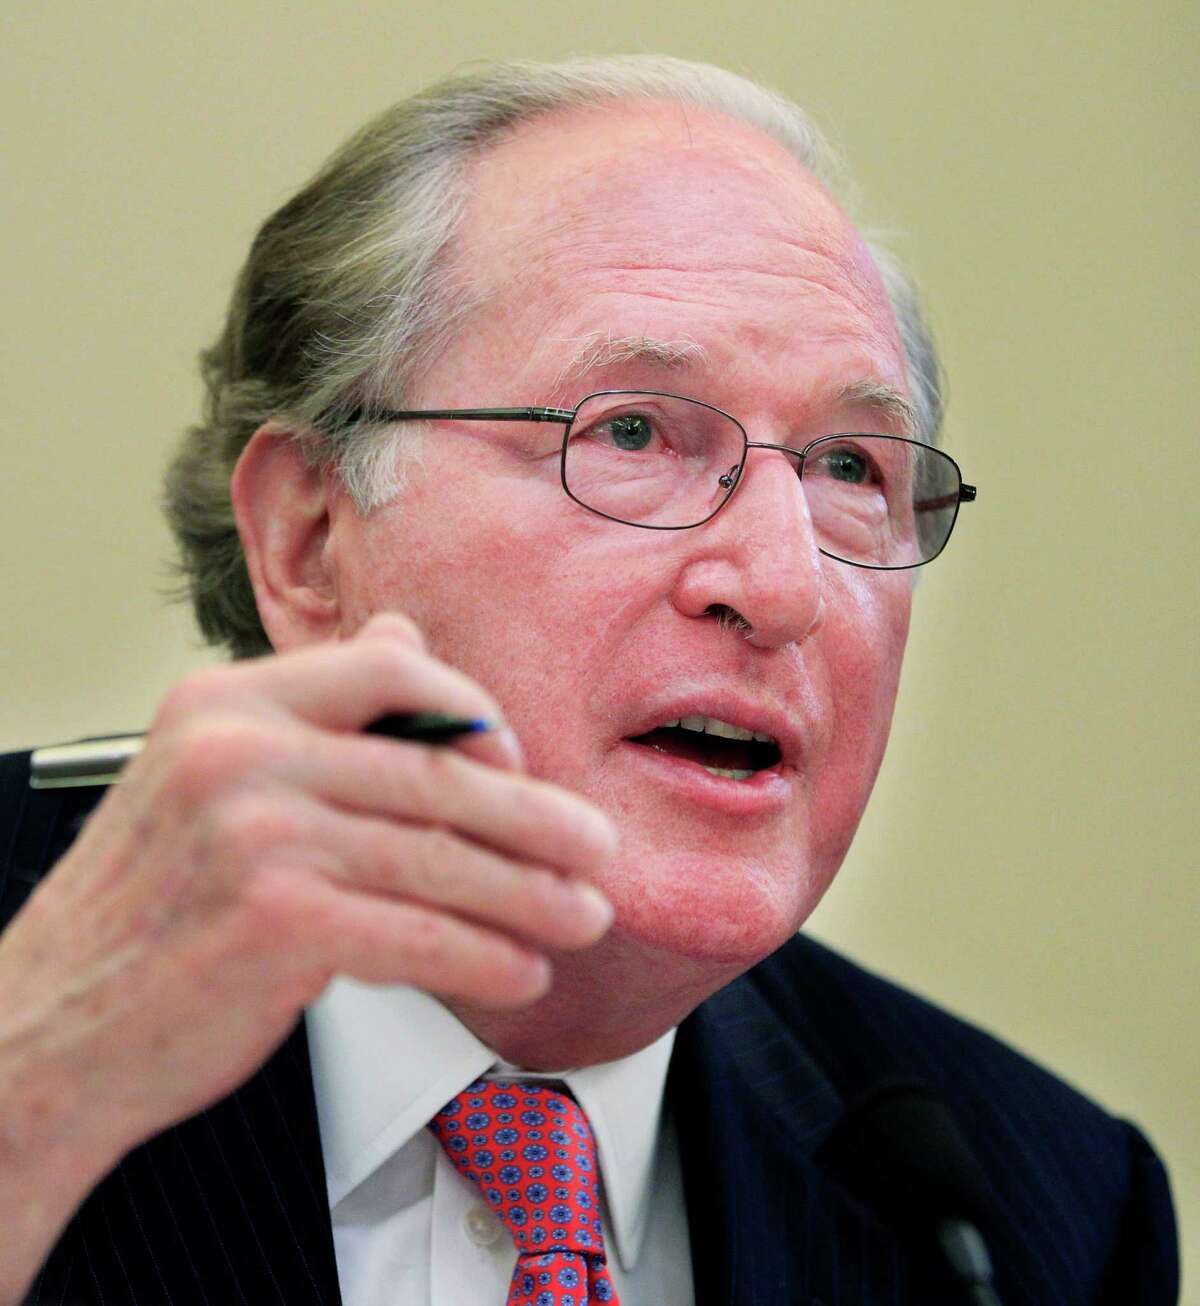 Senate Commerce Chairman Sen. Jay Rockefeller, D-W.Va., presides over a hearing of the committee on Capitol Hill in Washington, Wednesday, July 13, 2011. Rockefeller urged an investigation into whether Rupert Murdoch's U.K. newspapers had violated U.S. law in the phone hacking scandal. (AP Photo/Manuel Balce Ceneta)